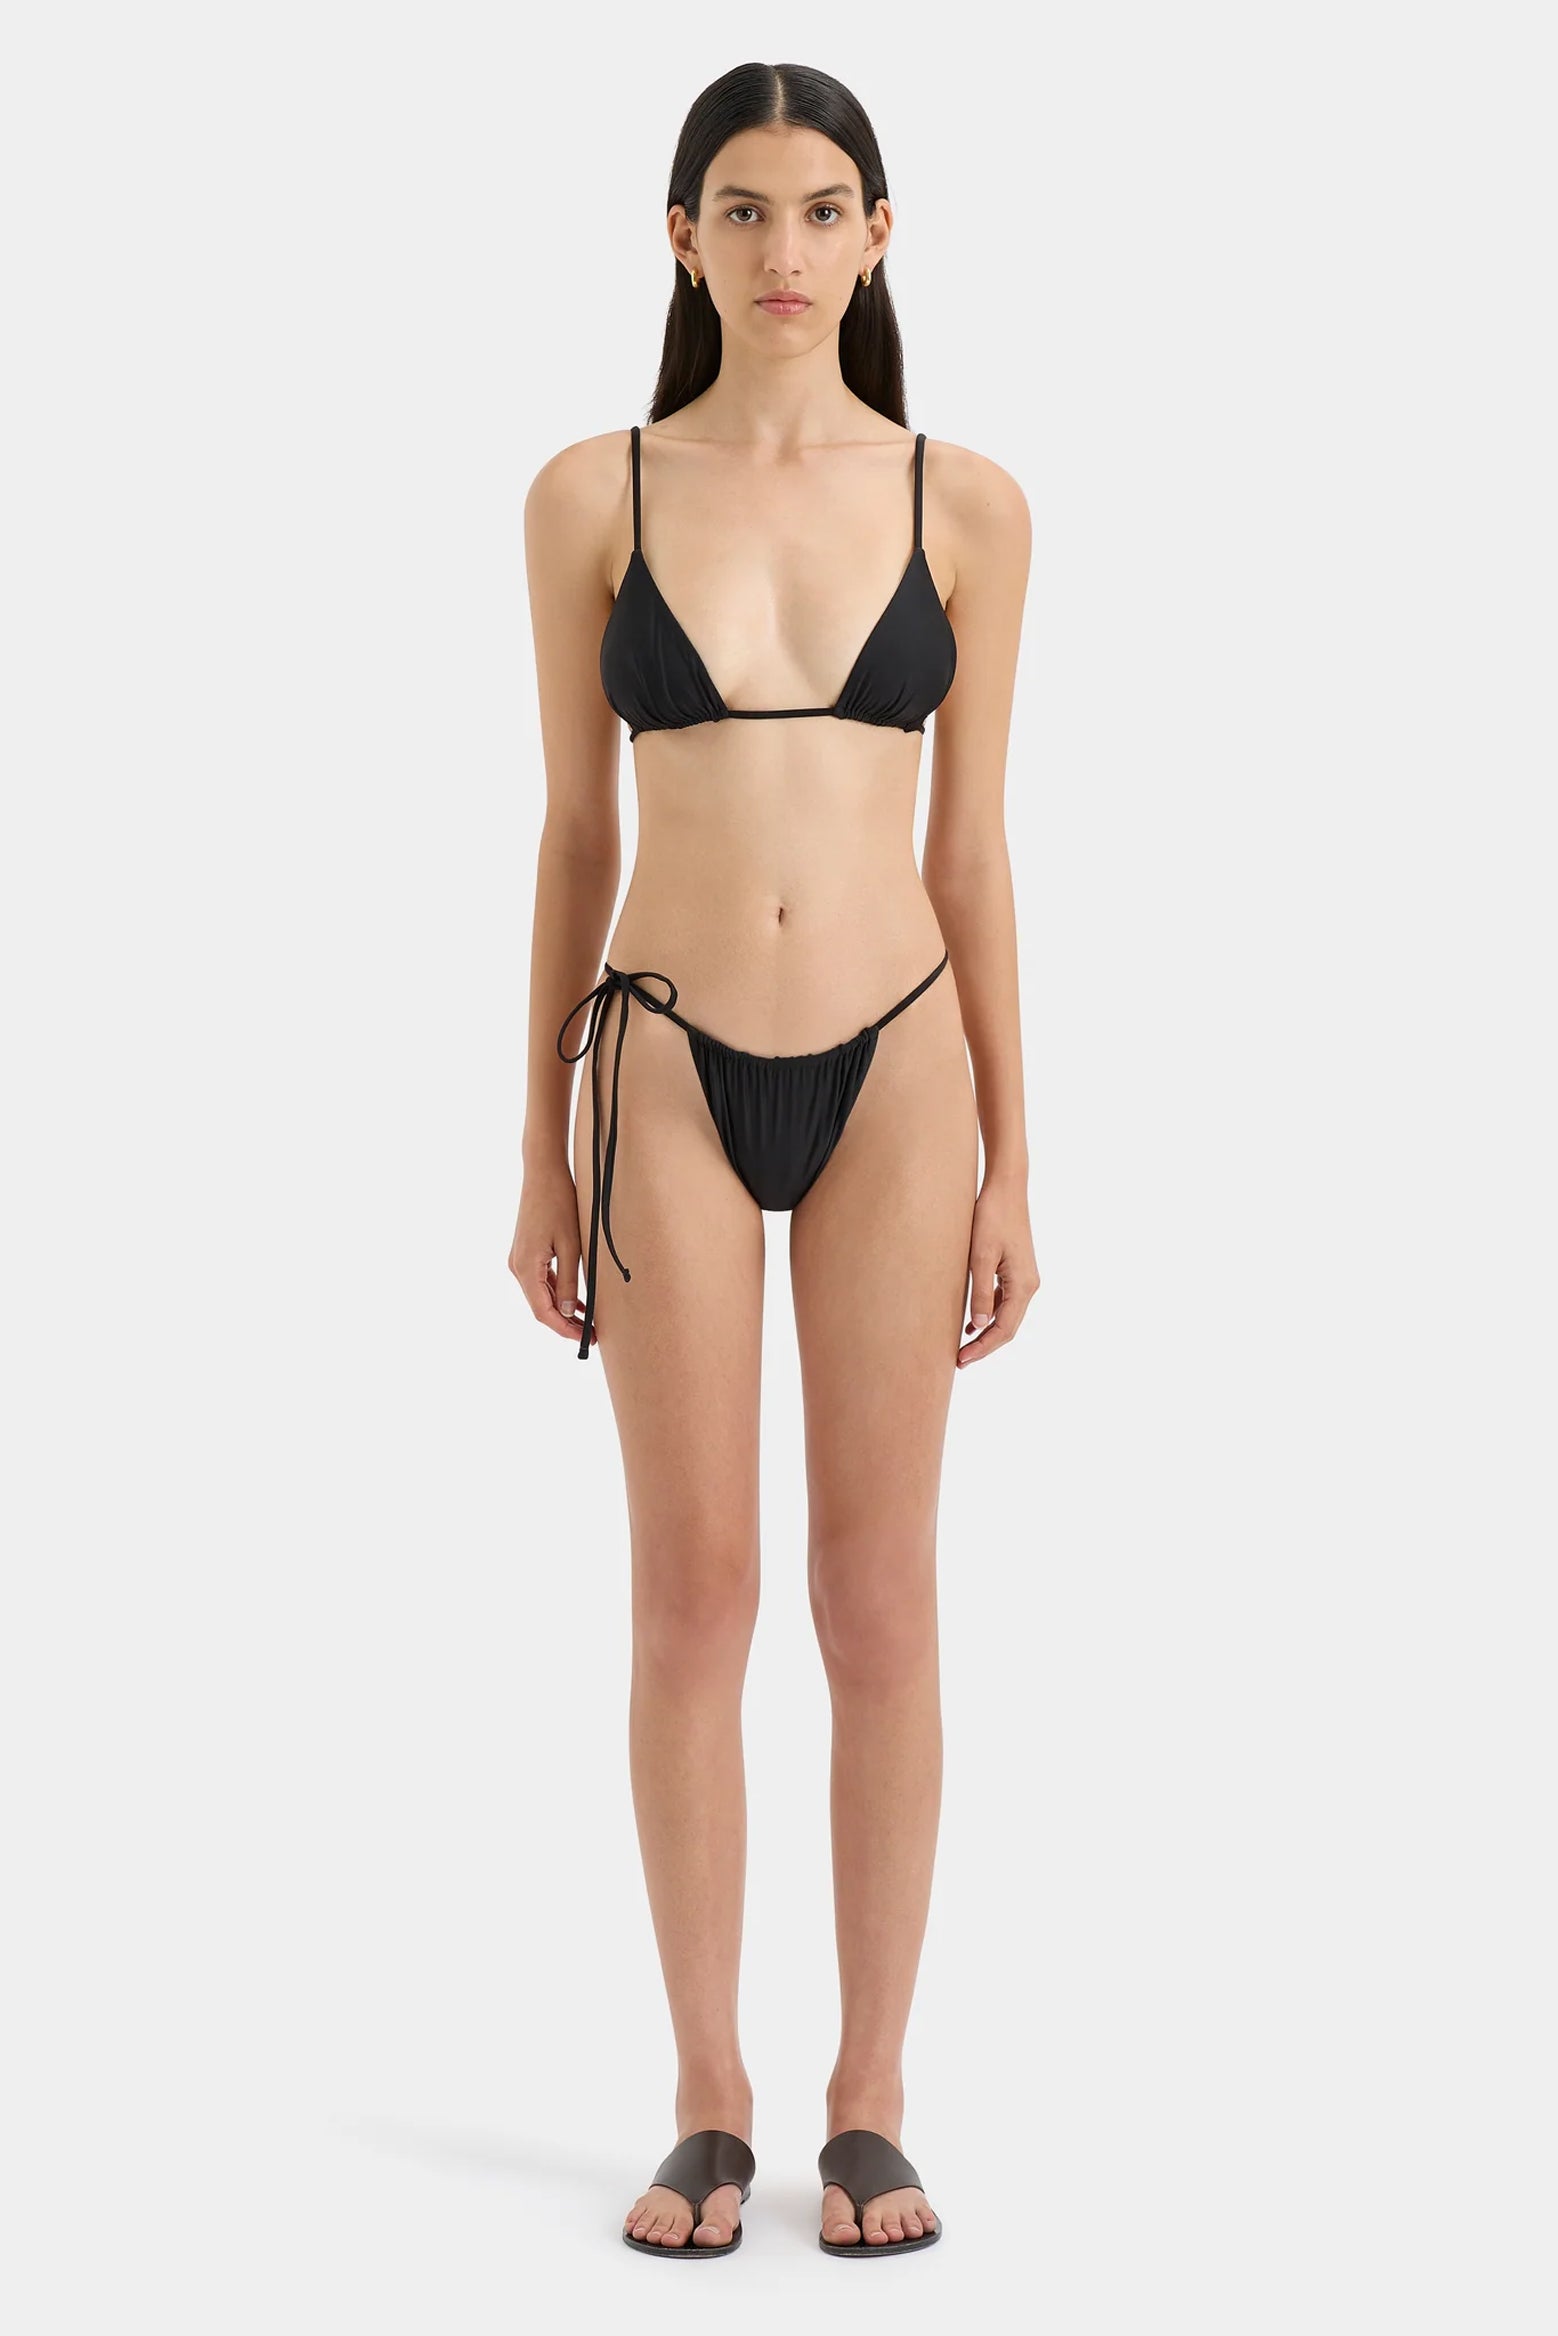 SIR Hendry String Bikini Bottoms in Black available at The New Trend Australia.